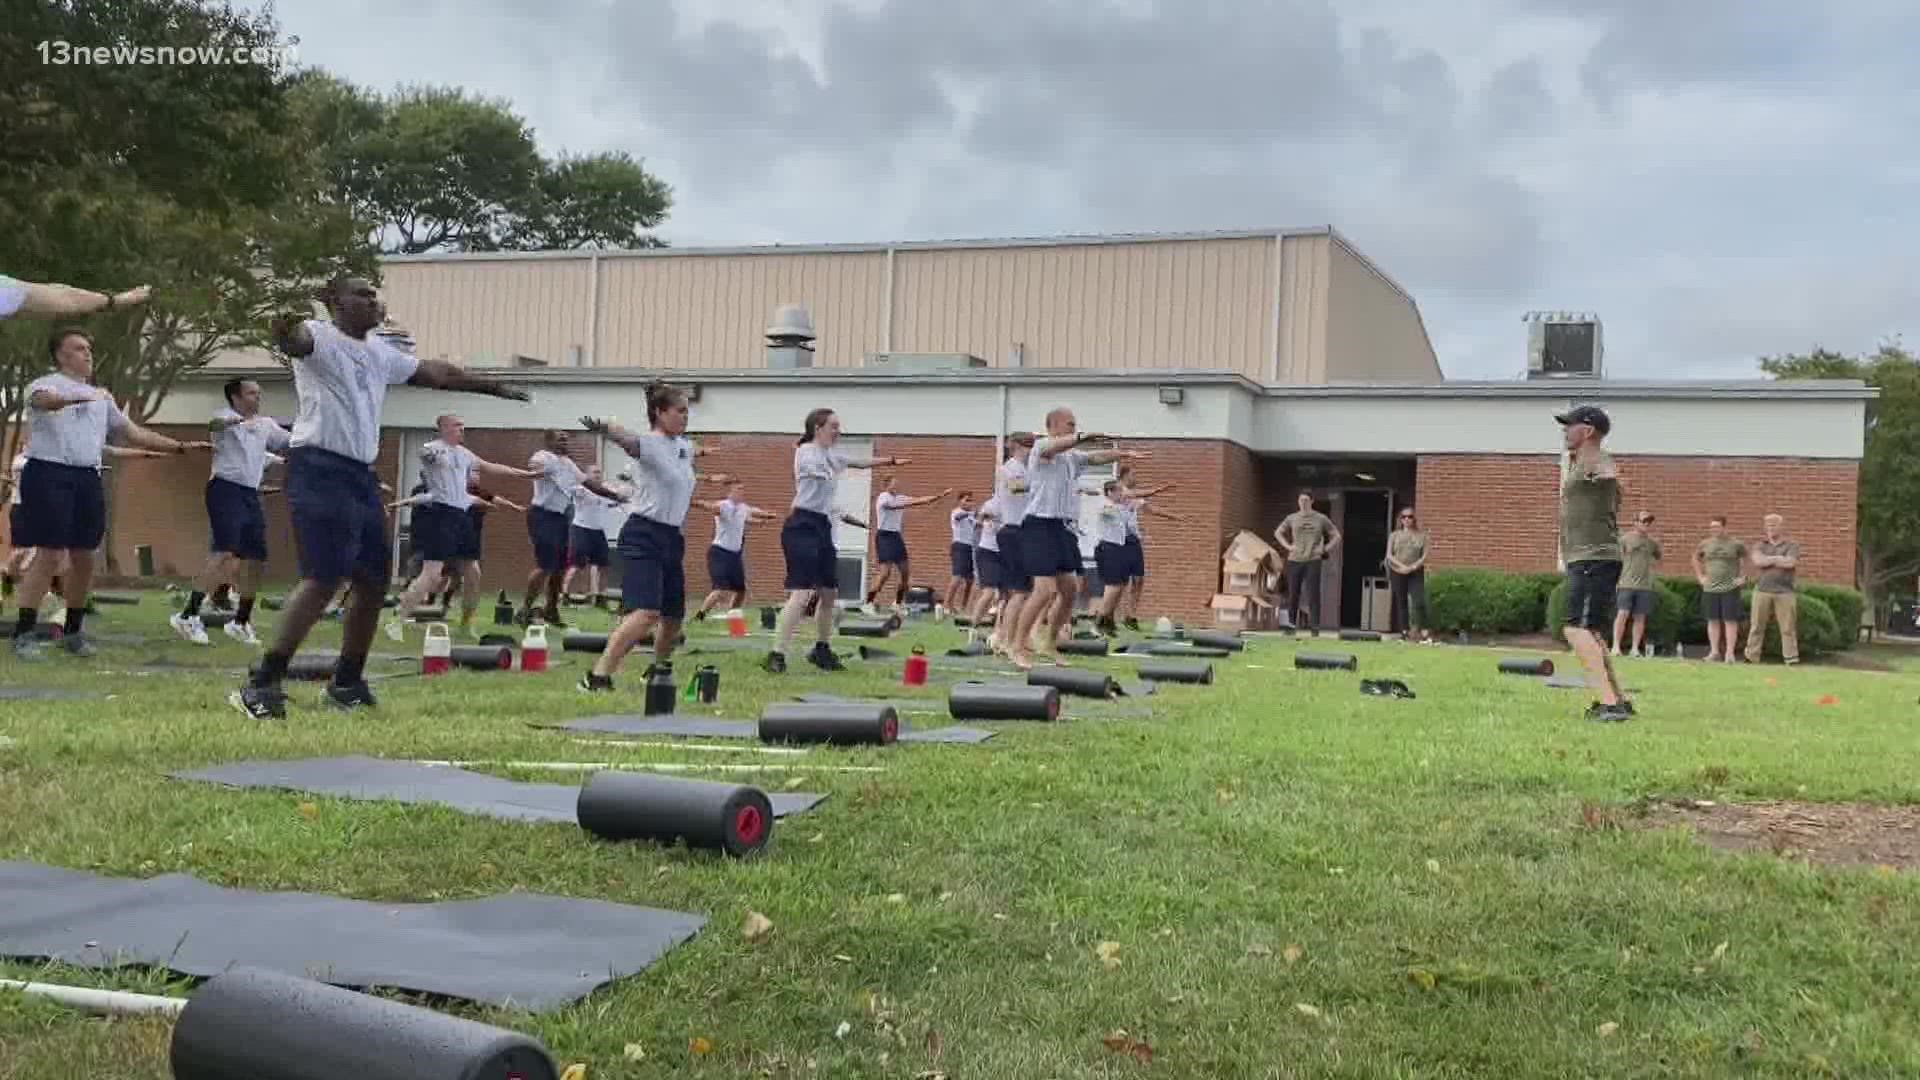 O2X Human Performance held a workshop to teach Chesapeake firefighters skills that can help them endure a long, physically and mentally demanding career.